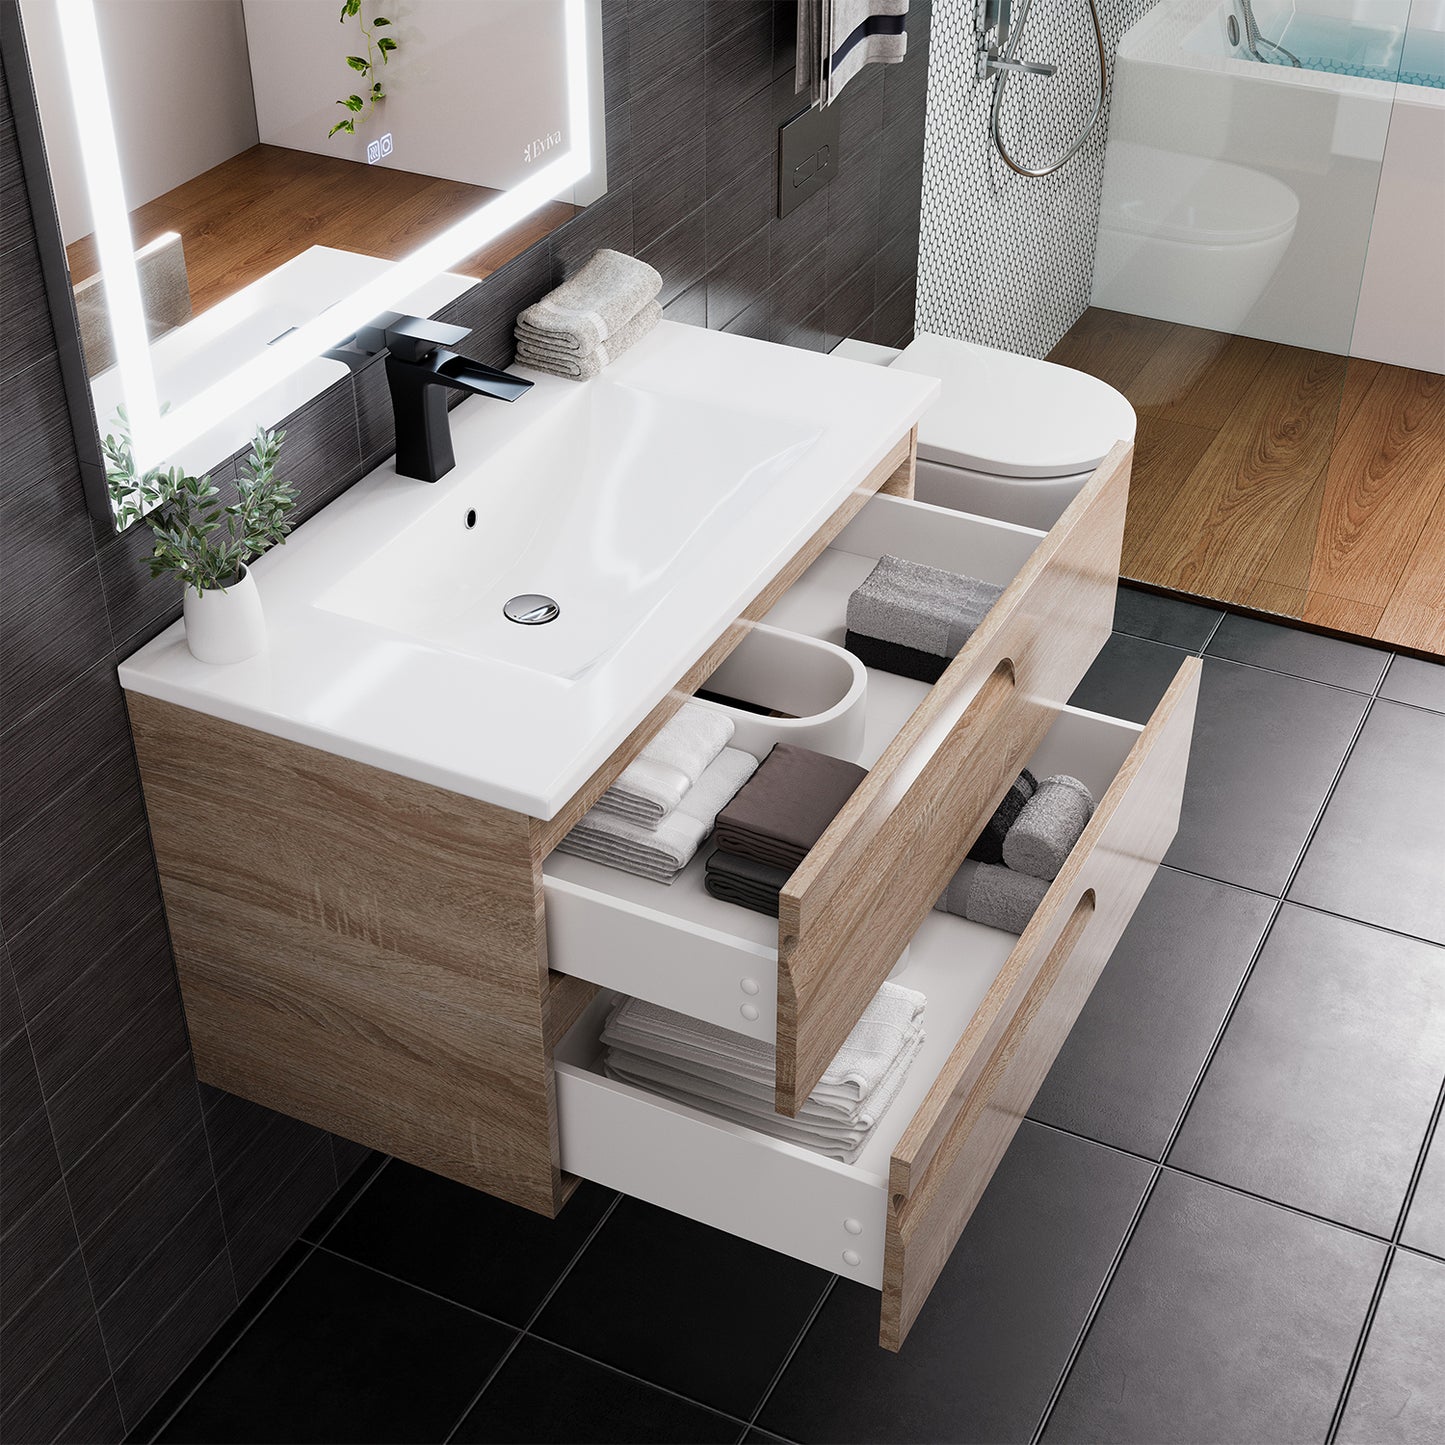 Joy 36"W x 18"D Maple Bathroom Vanity with Porcelain Countertop and Integrated Sink